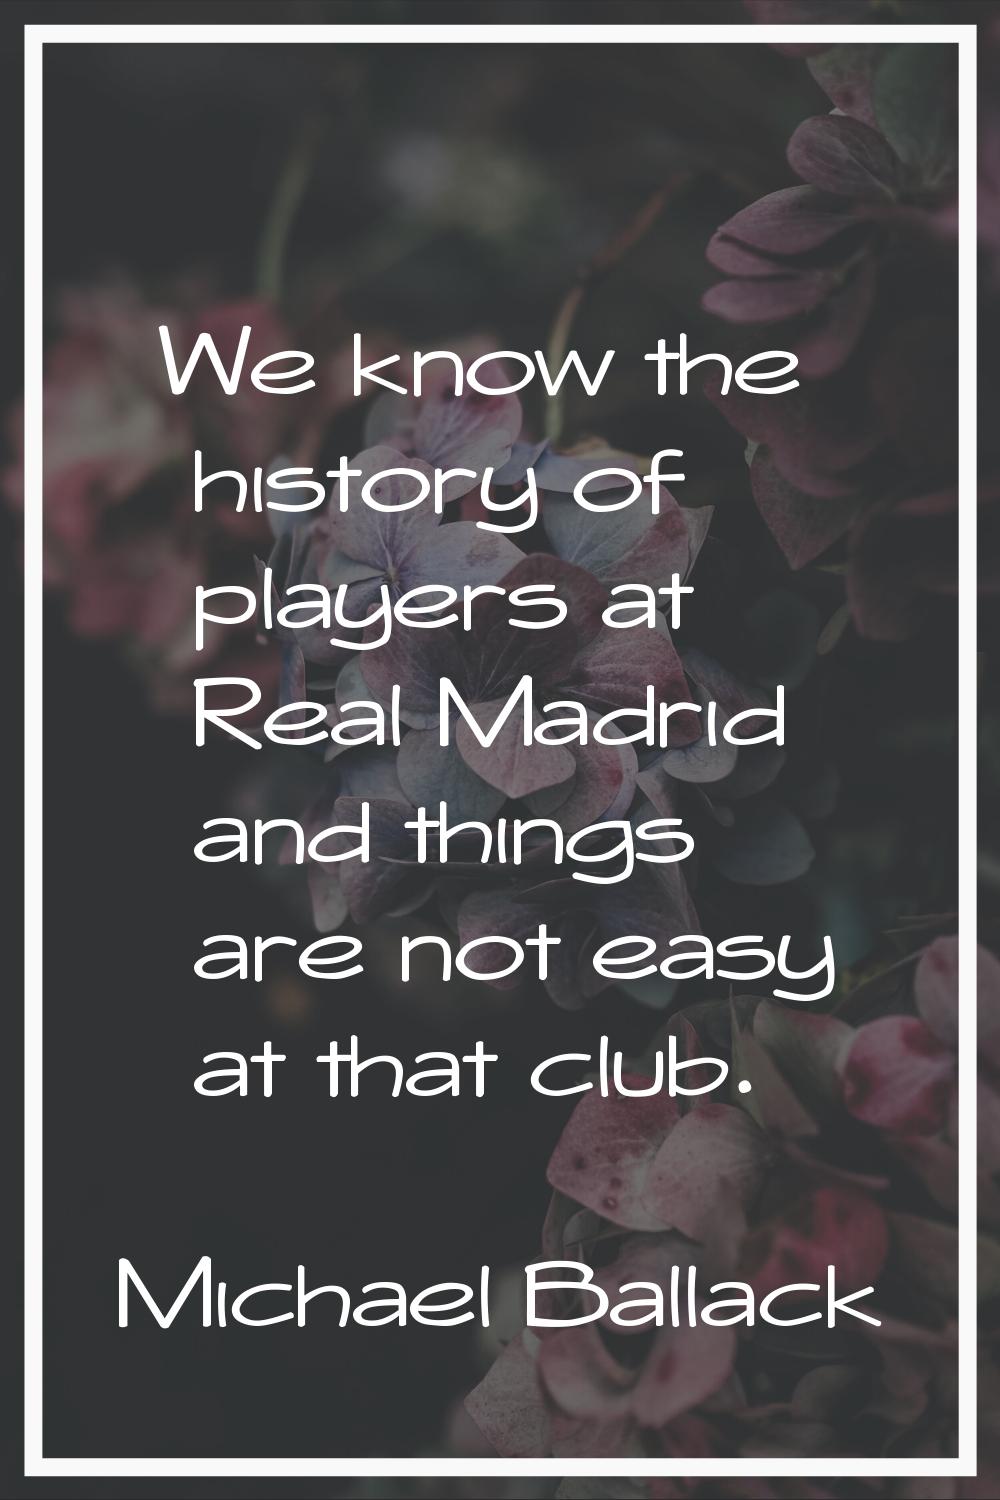 We know the history of players at Real Madrid and things are not easy at that club.